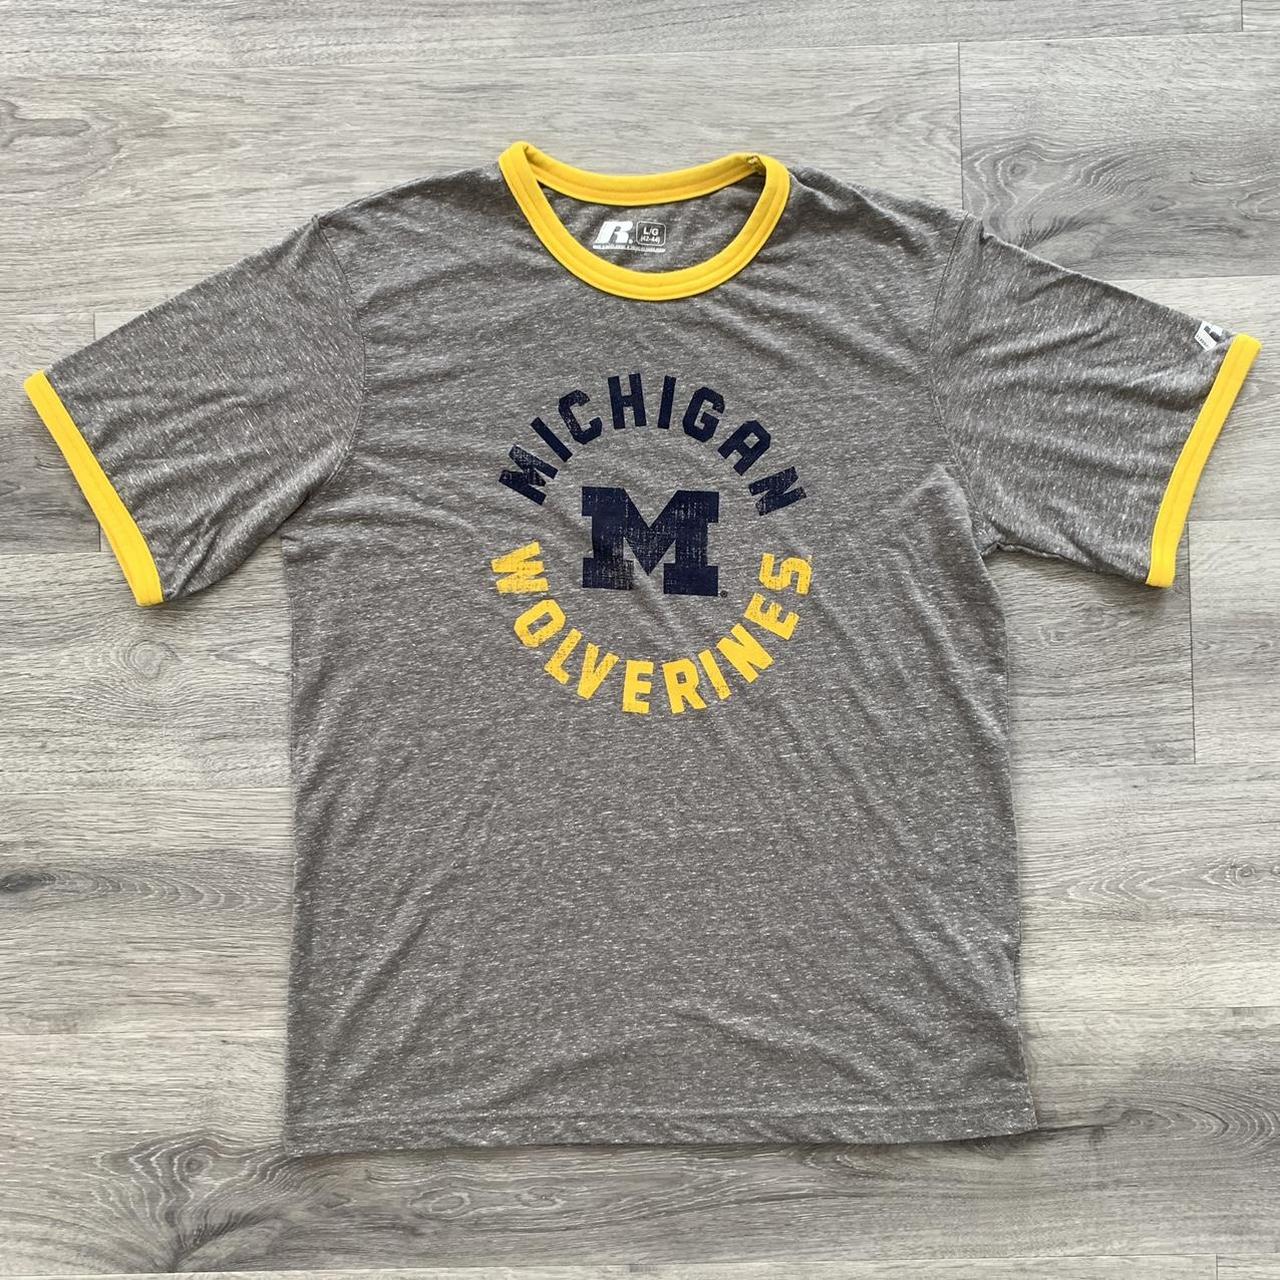 Russell Athletic Men's Grey and Yellow T-shirt